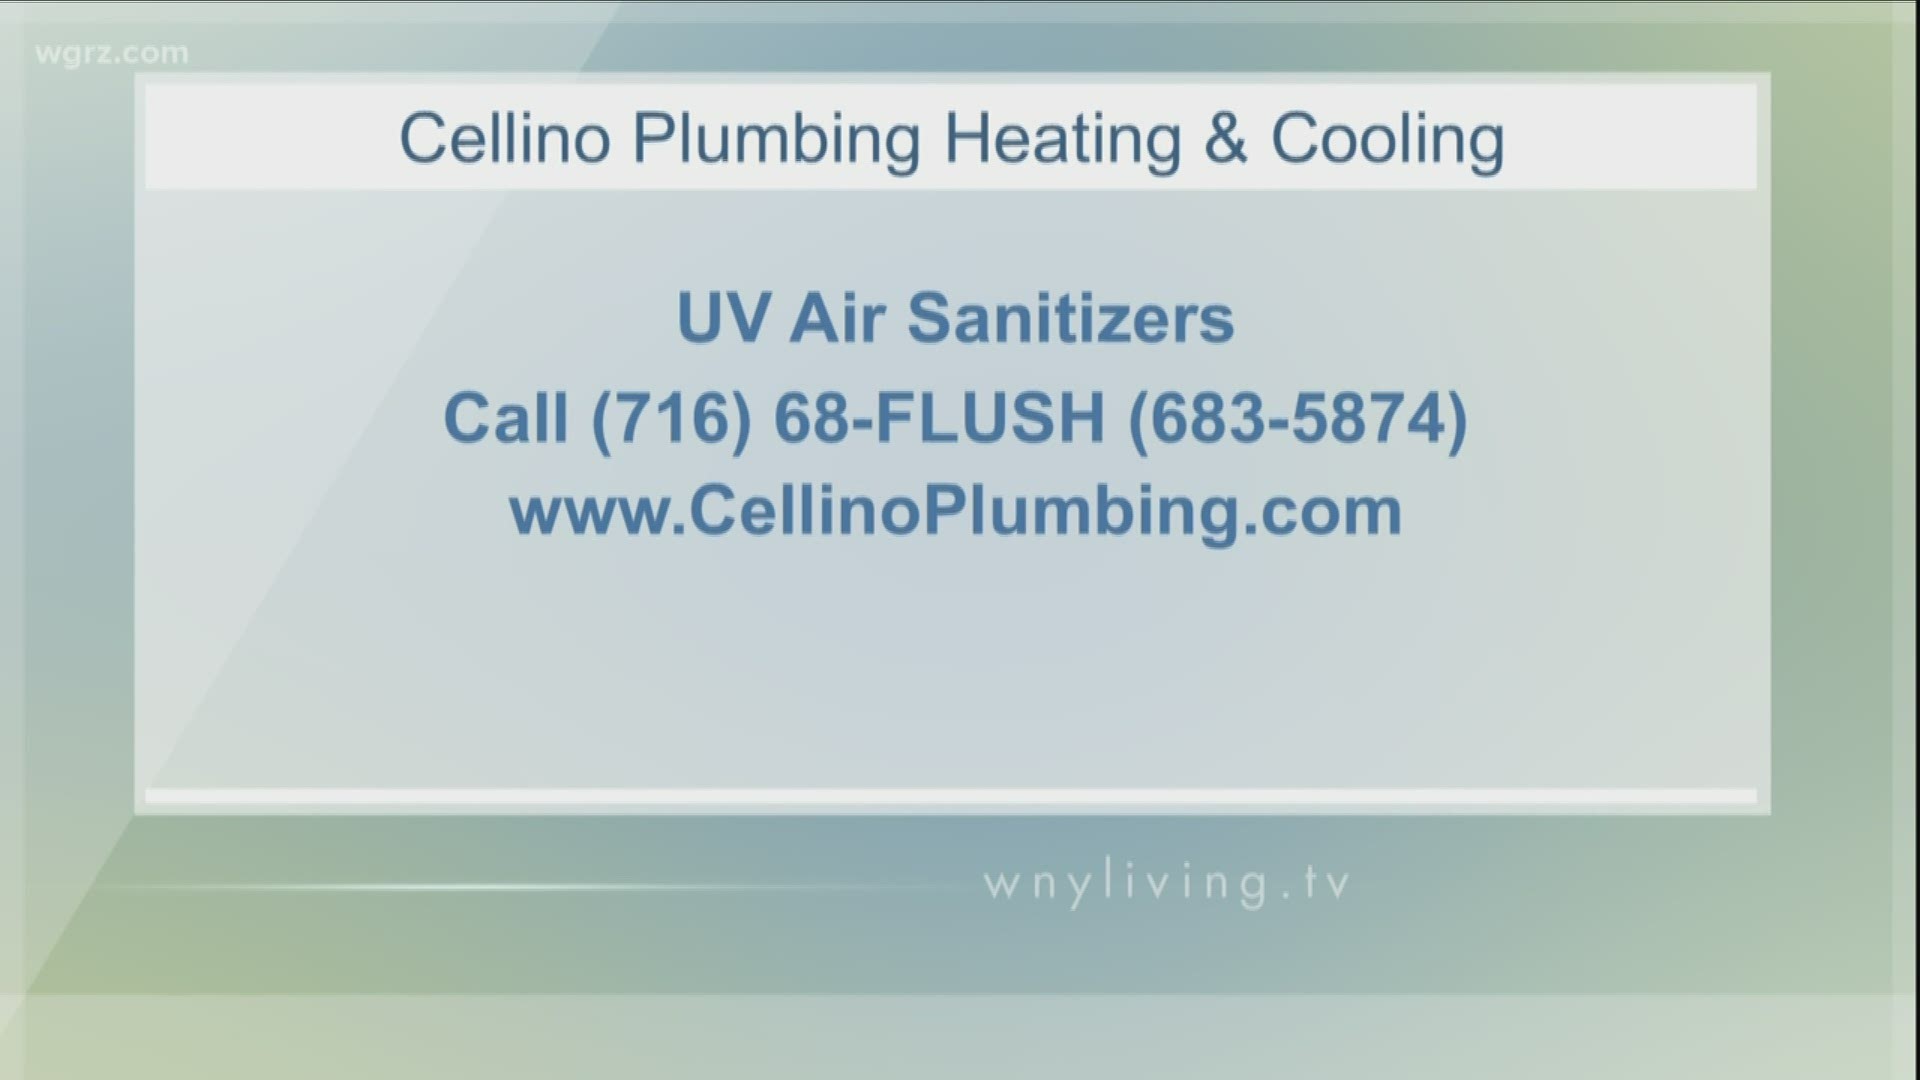 March 14 - Cellino Heating & Cooling